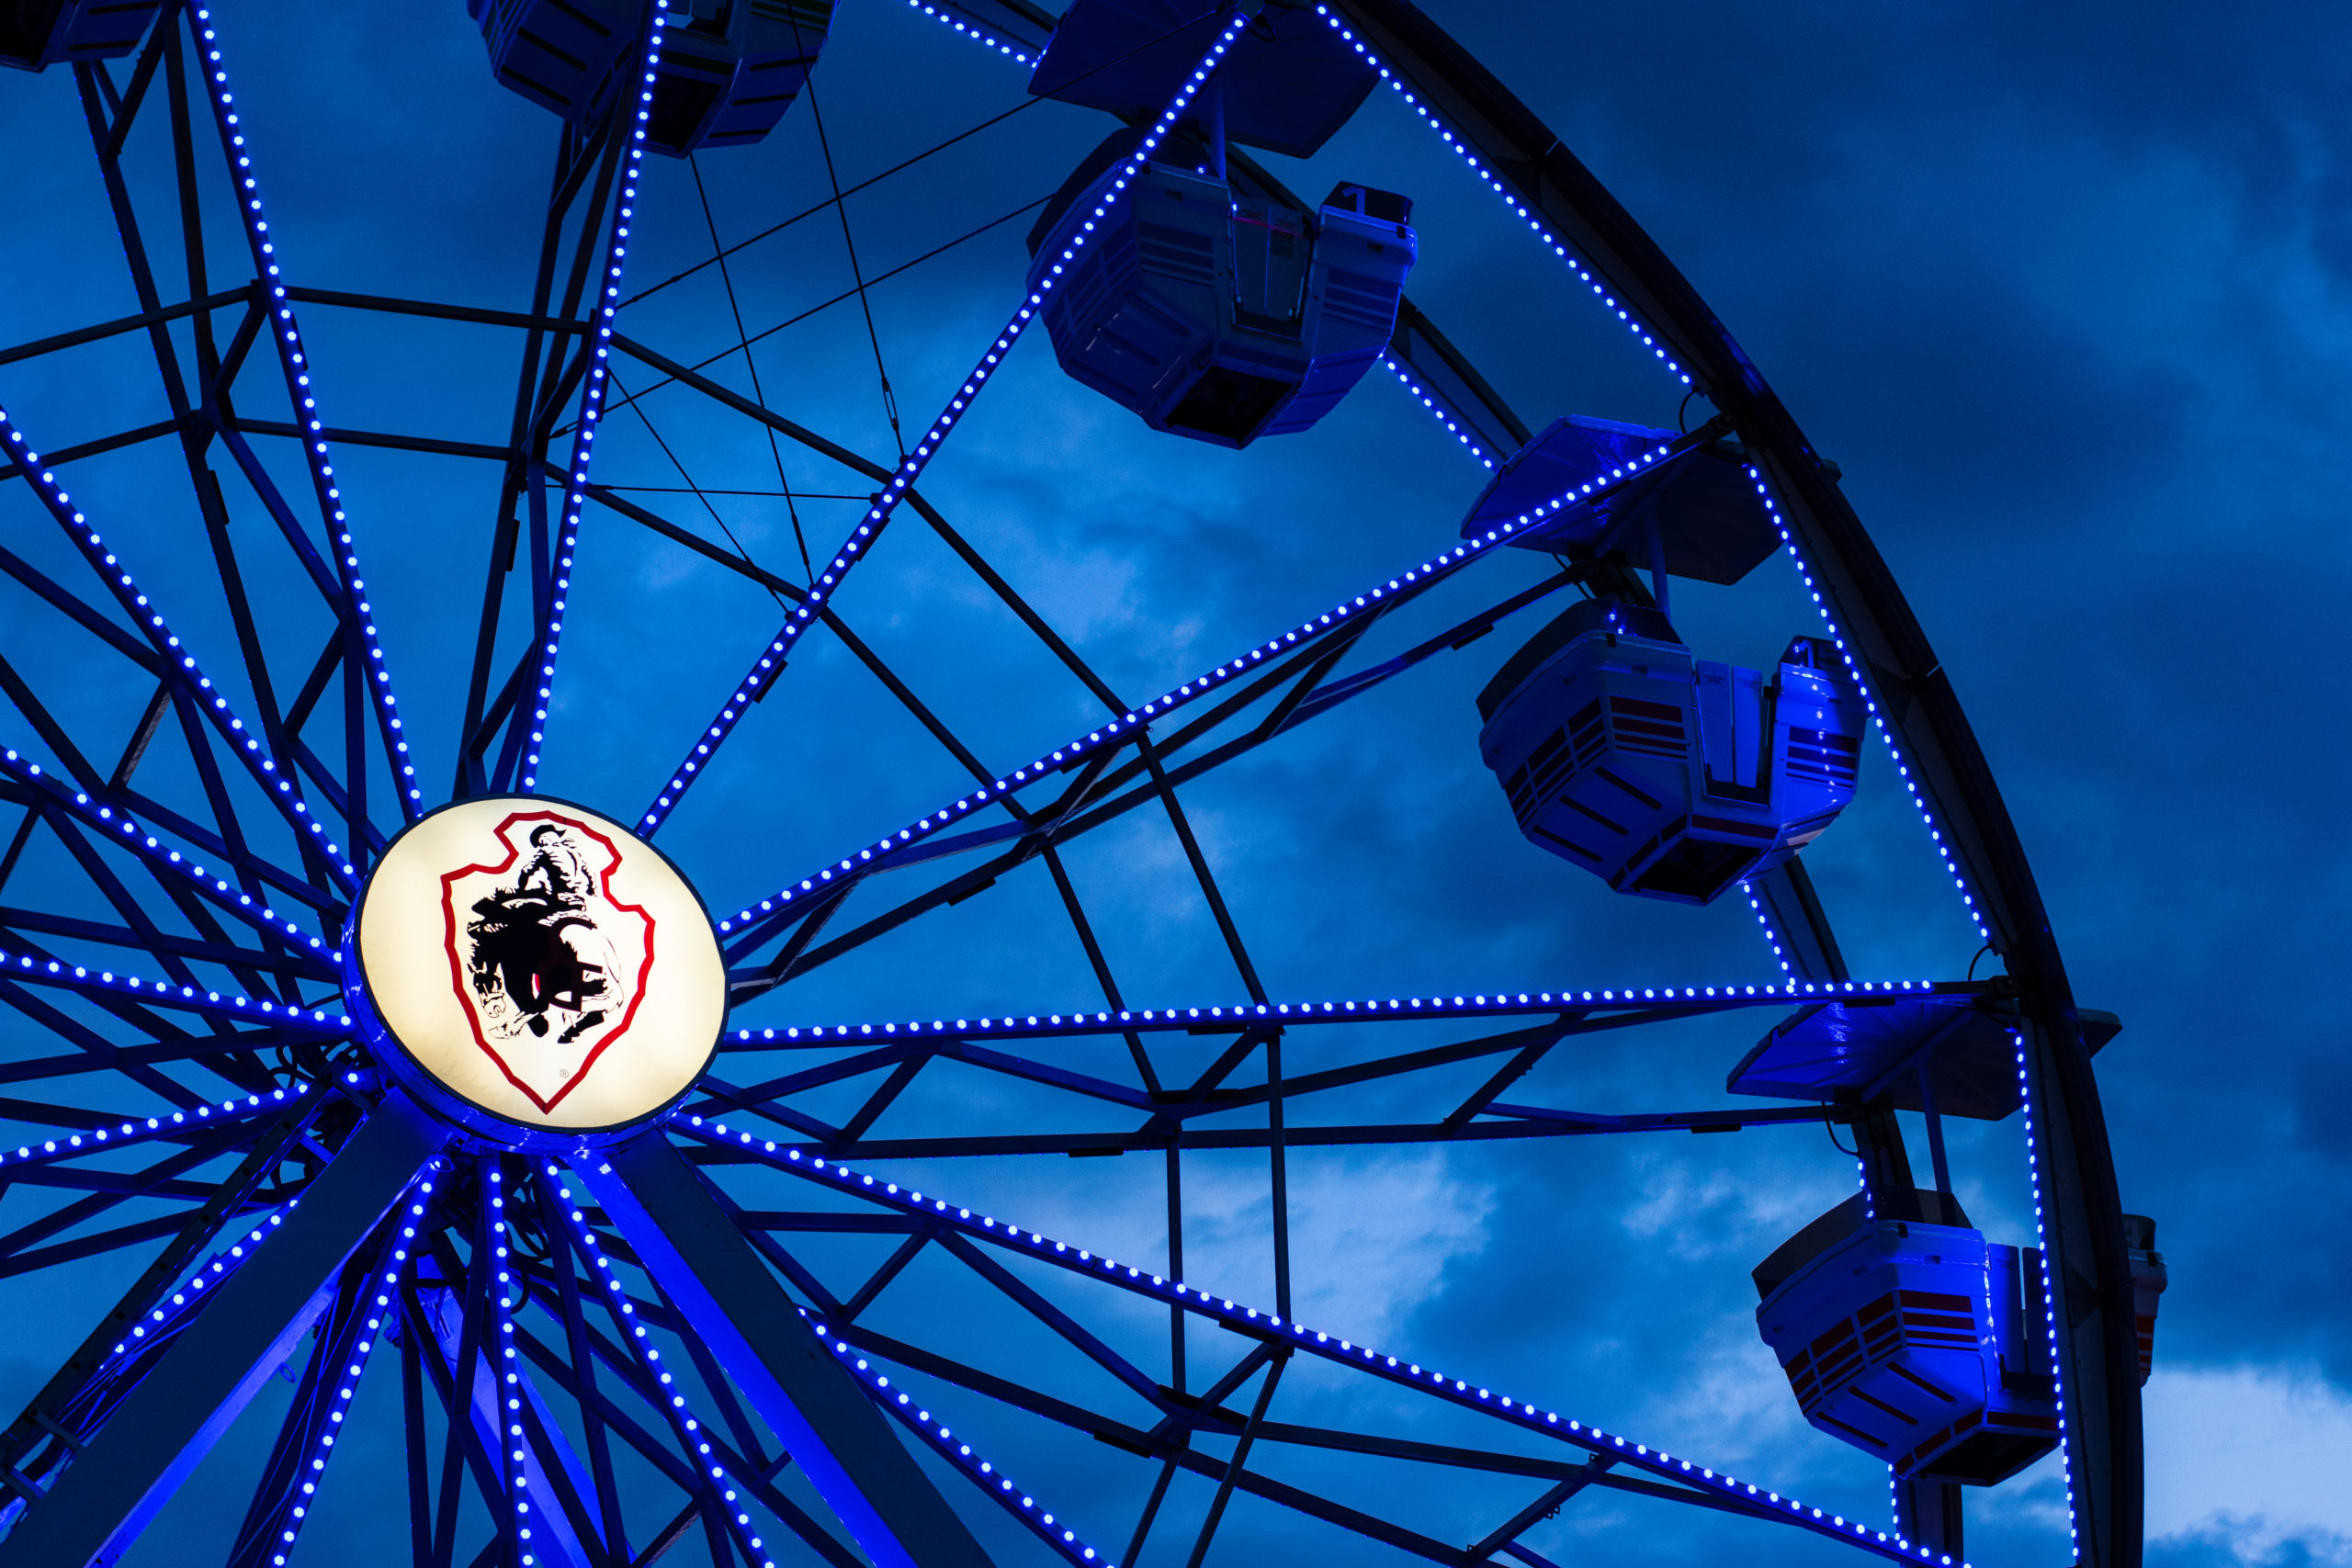 A photo of the Cheyenne Frontier Days ferris wheel with stormy clouds in the background.